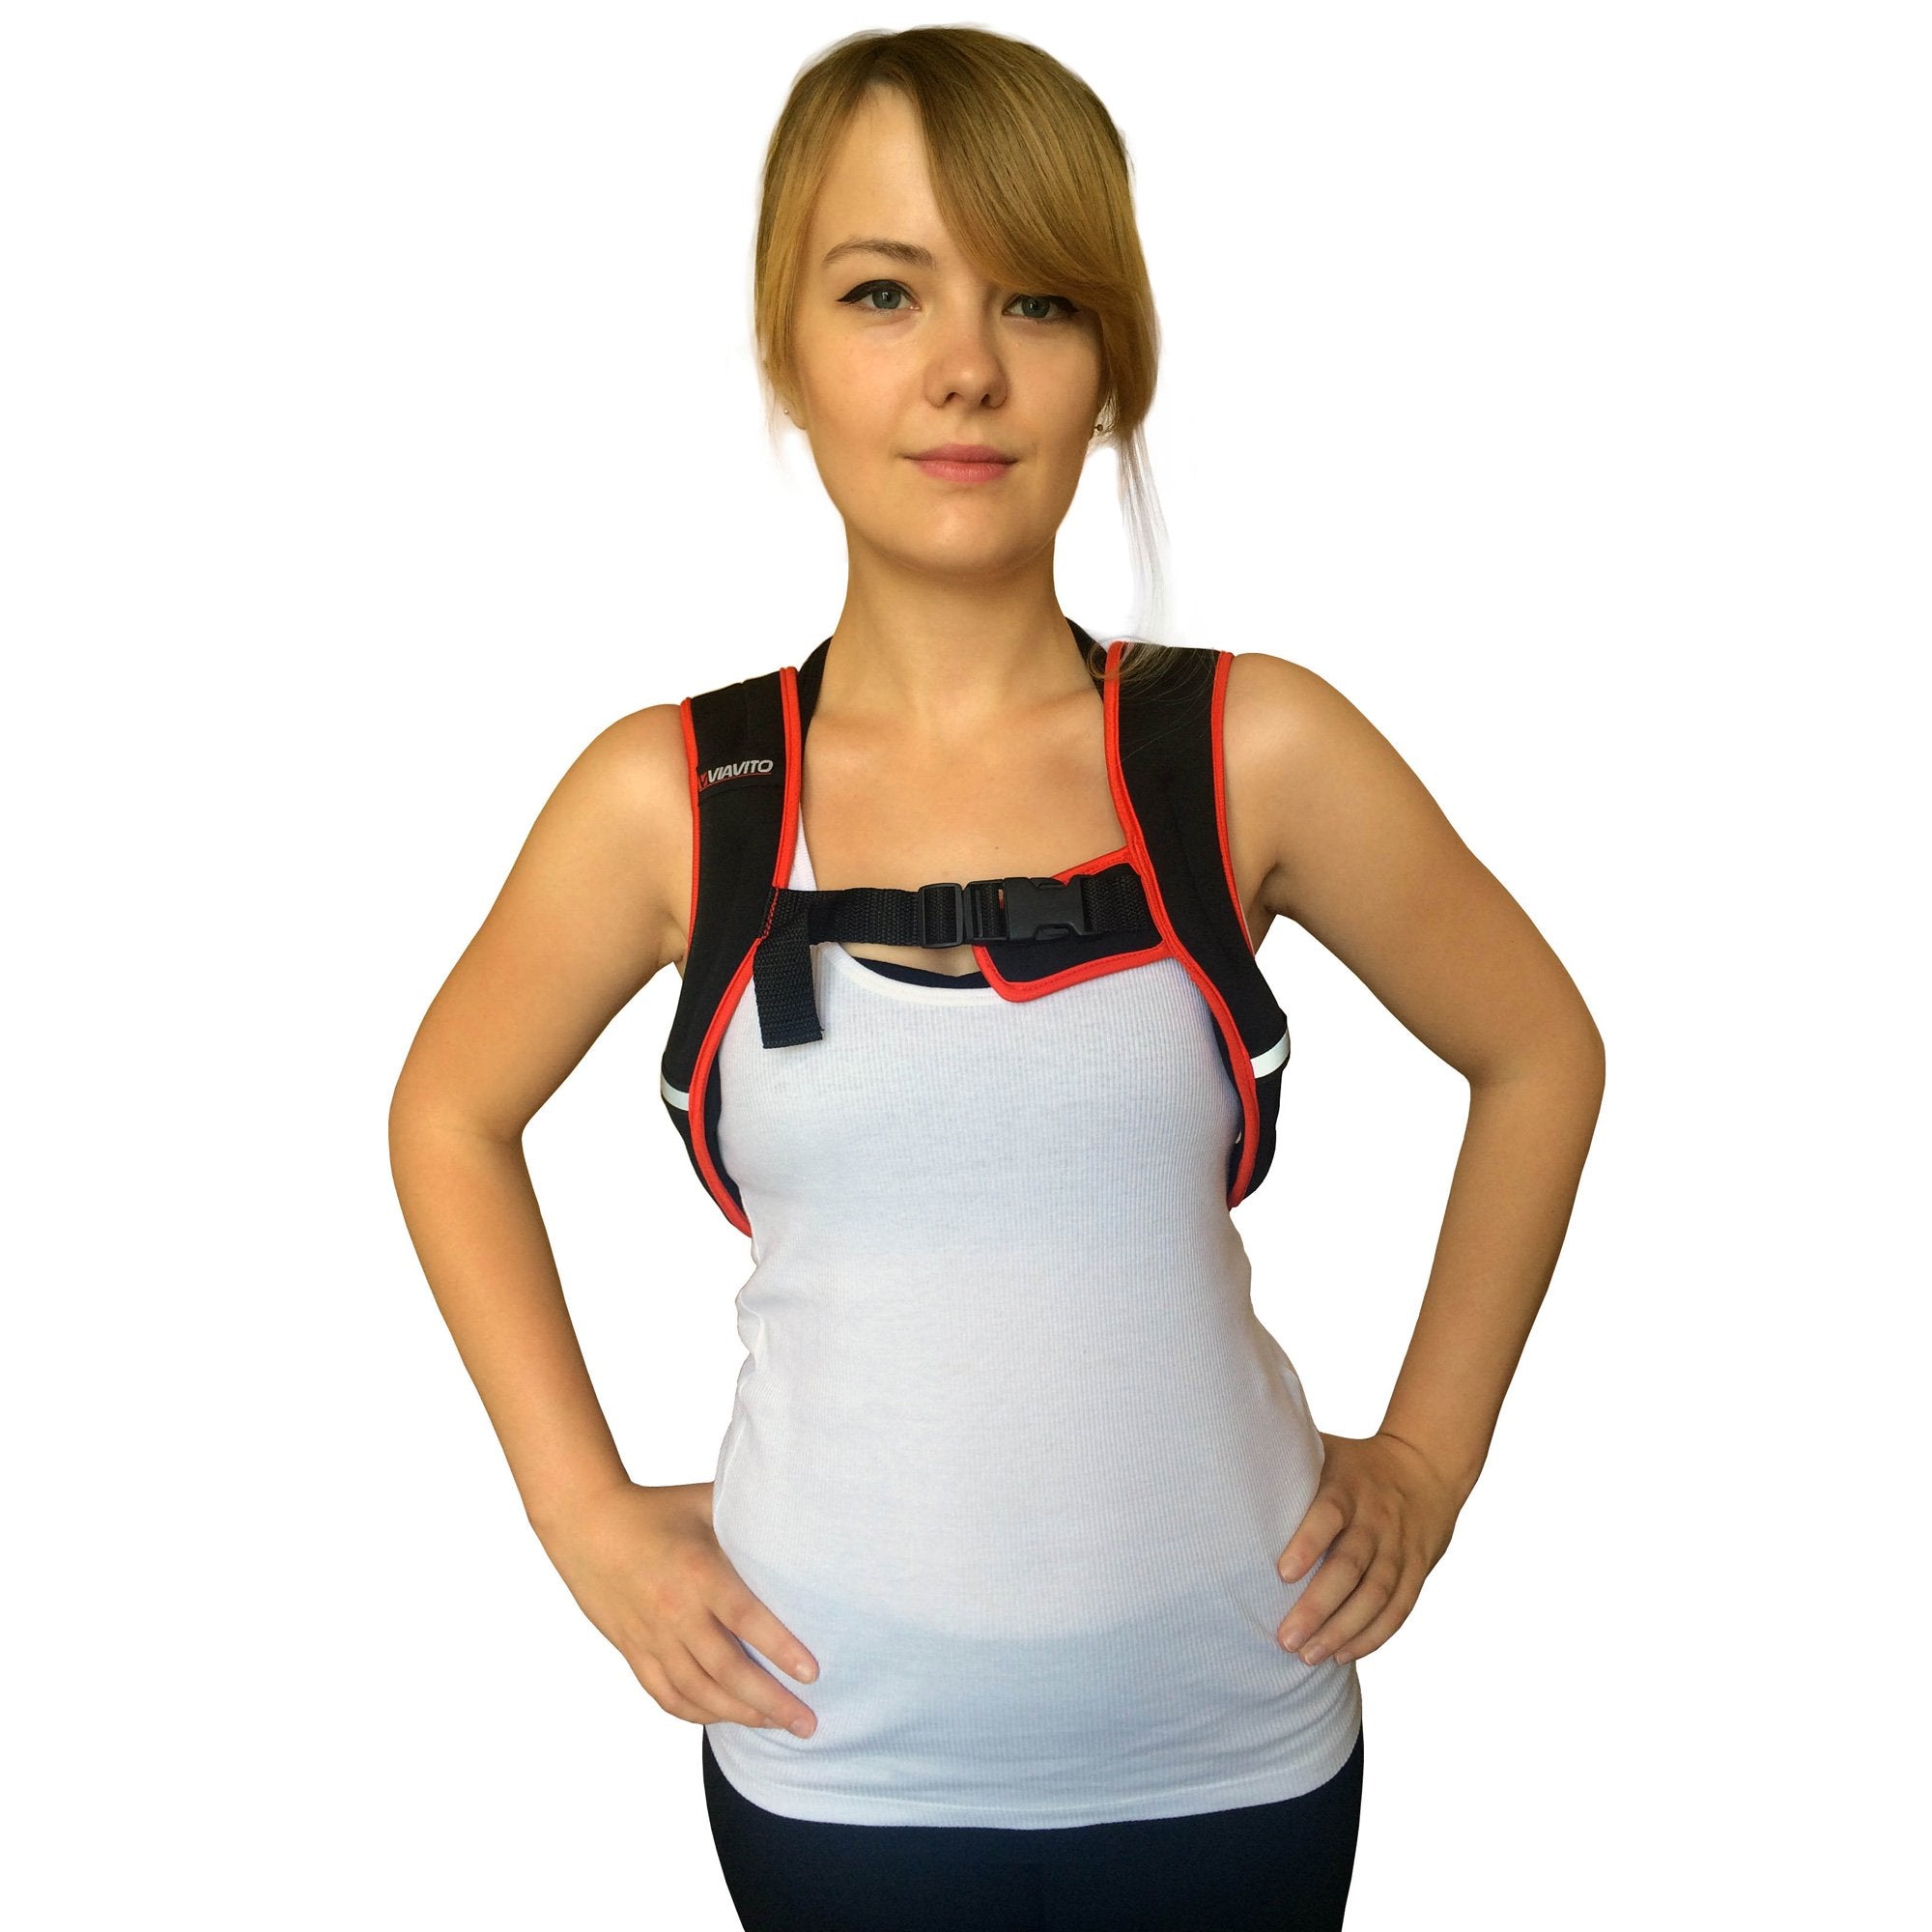 Viavito 2.5kg Weighted Vest